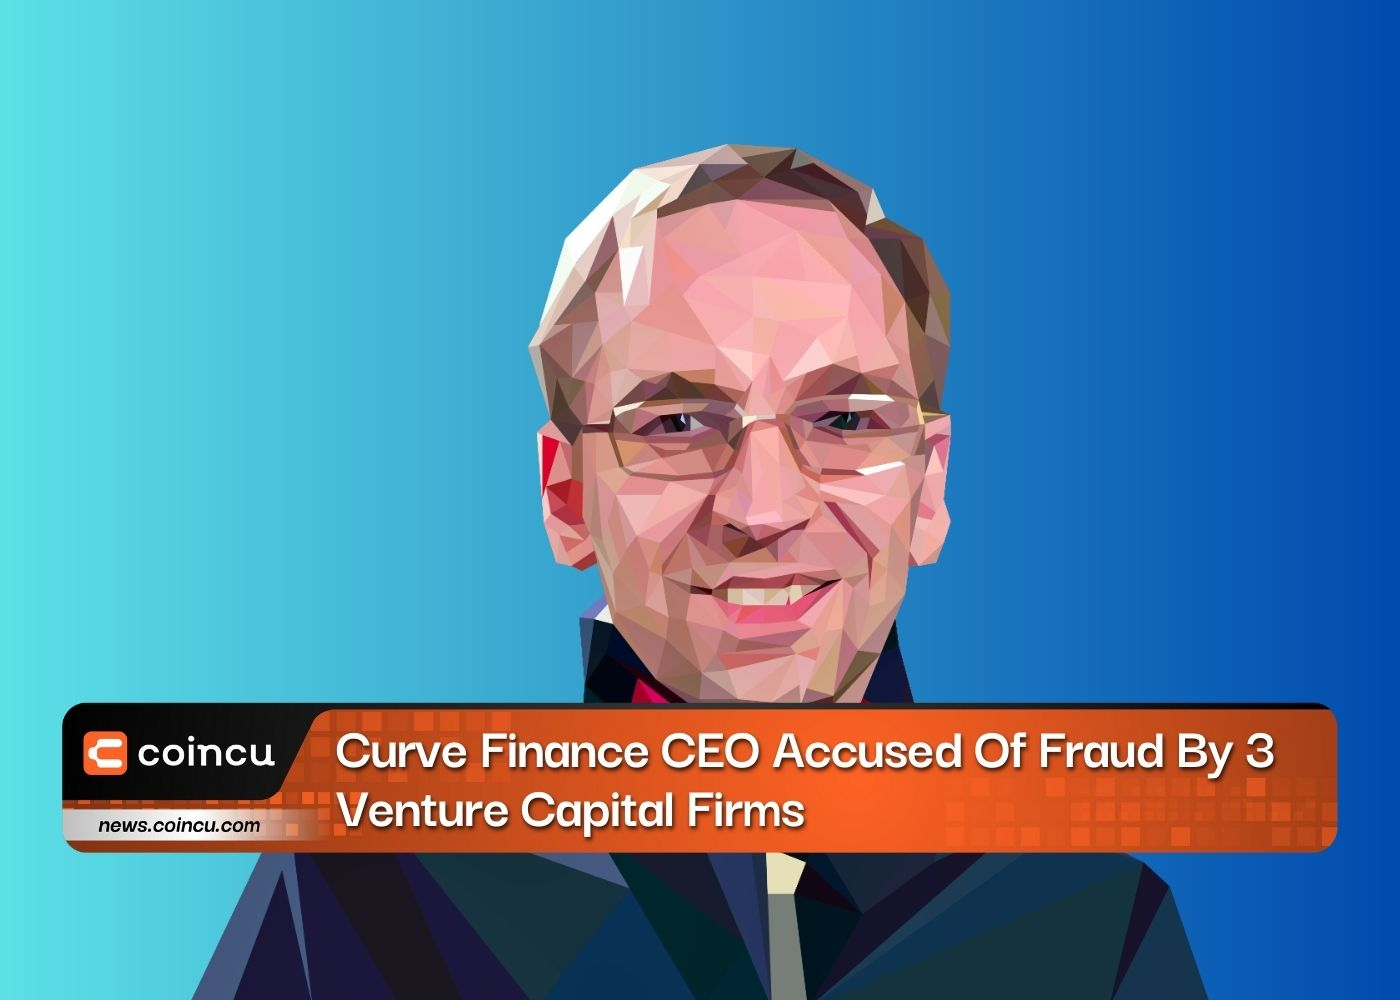 Curve Finance CEO Accused Of Fraud By 3 Venture Capital Firms